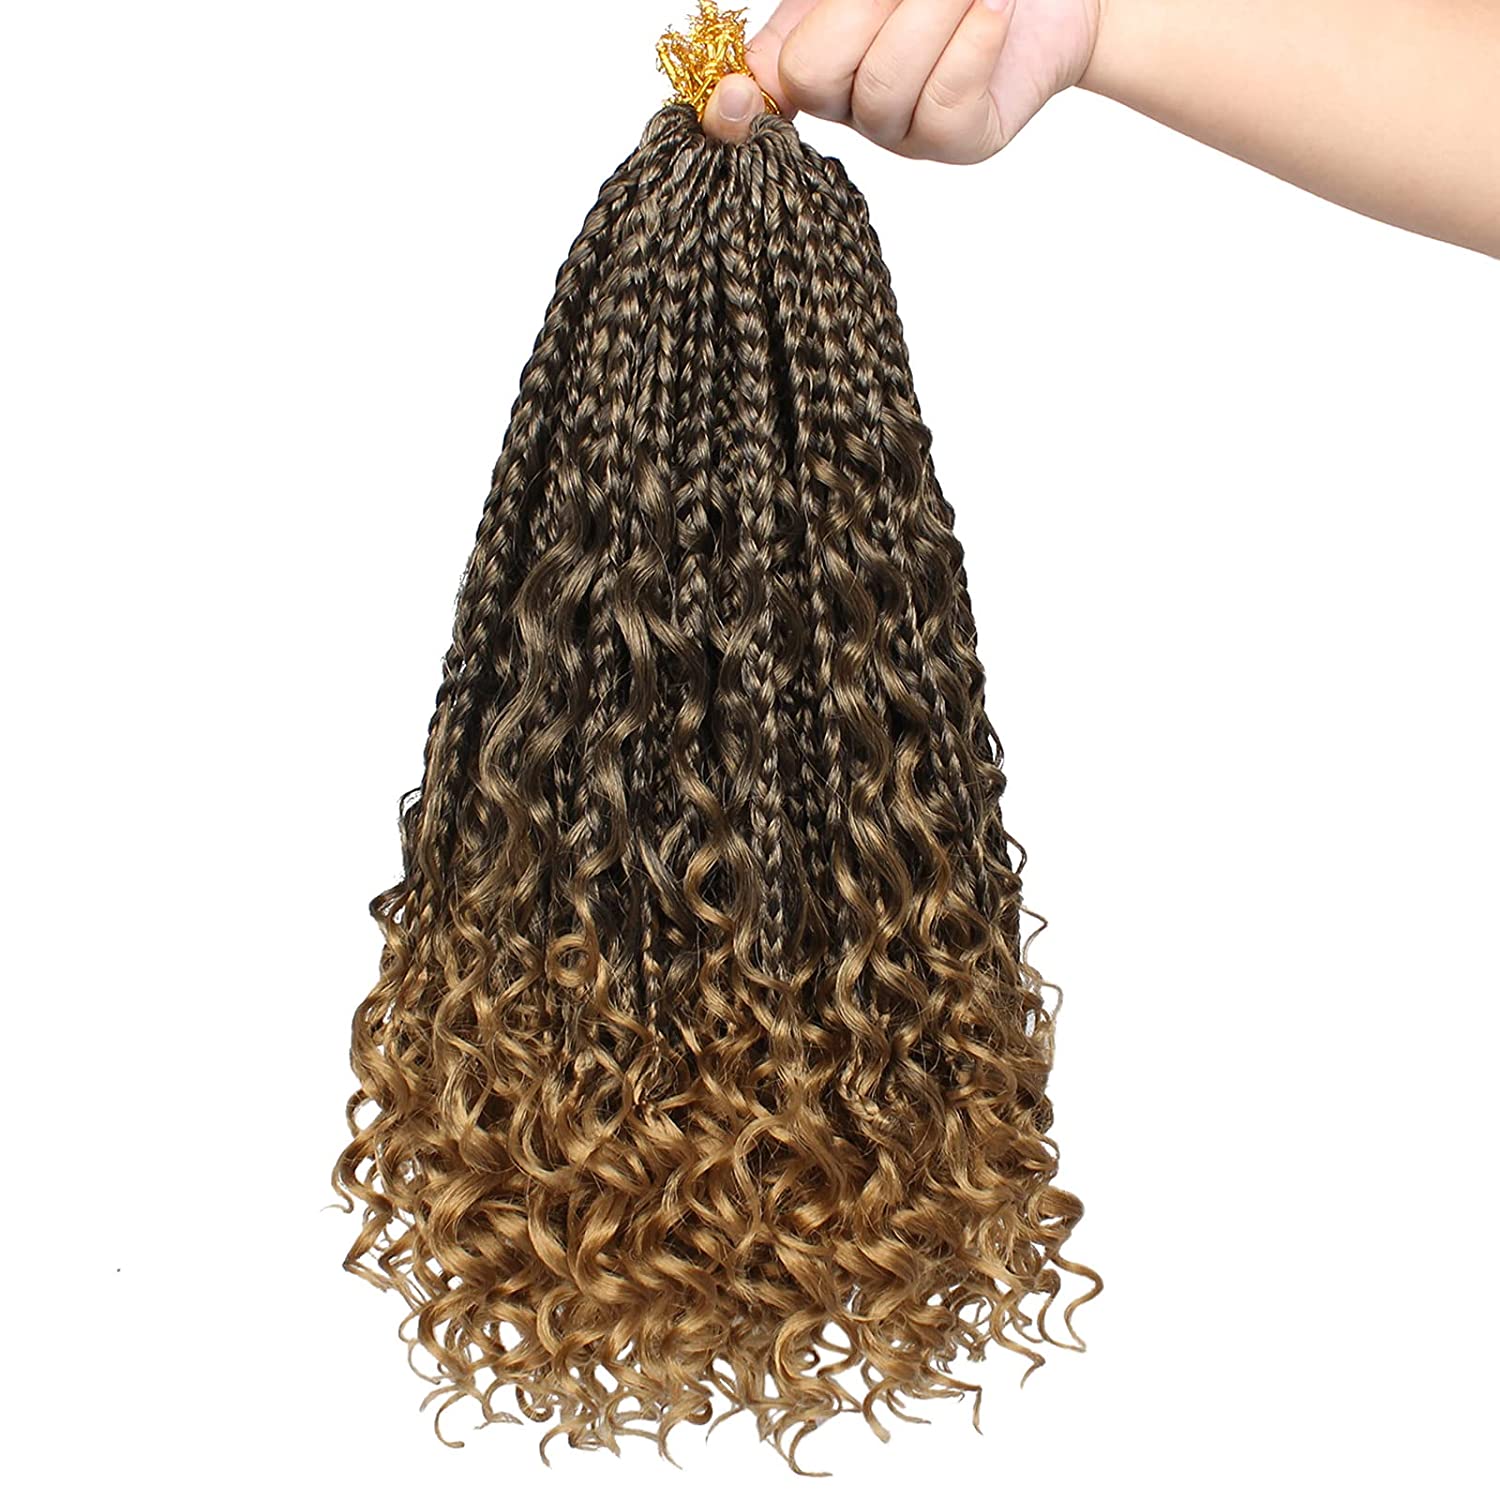 Goddess Freetress Beach Curl With Box Braids And Curly Ends For Black Women Crochet  Box Curly Loc Extensions From Dingyushangmao, $11.66